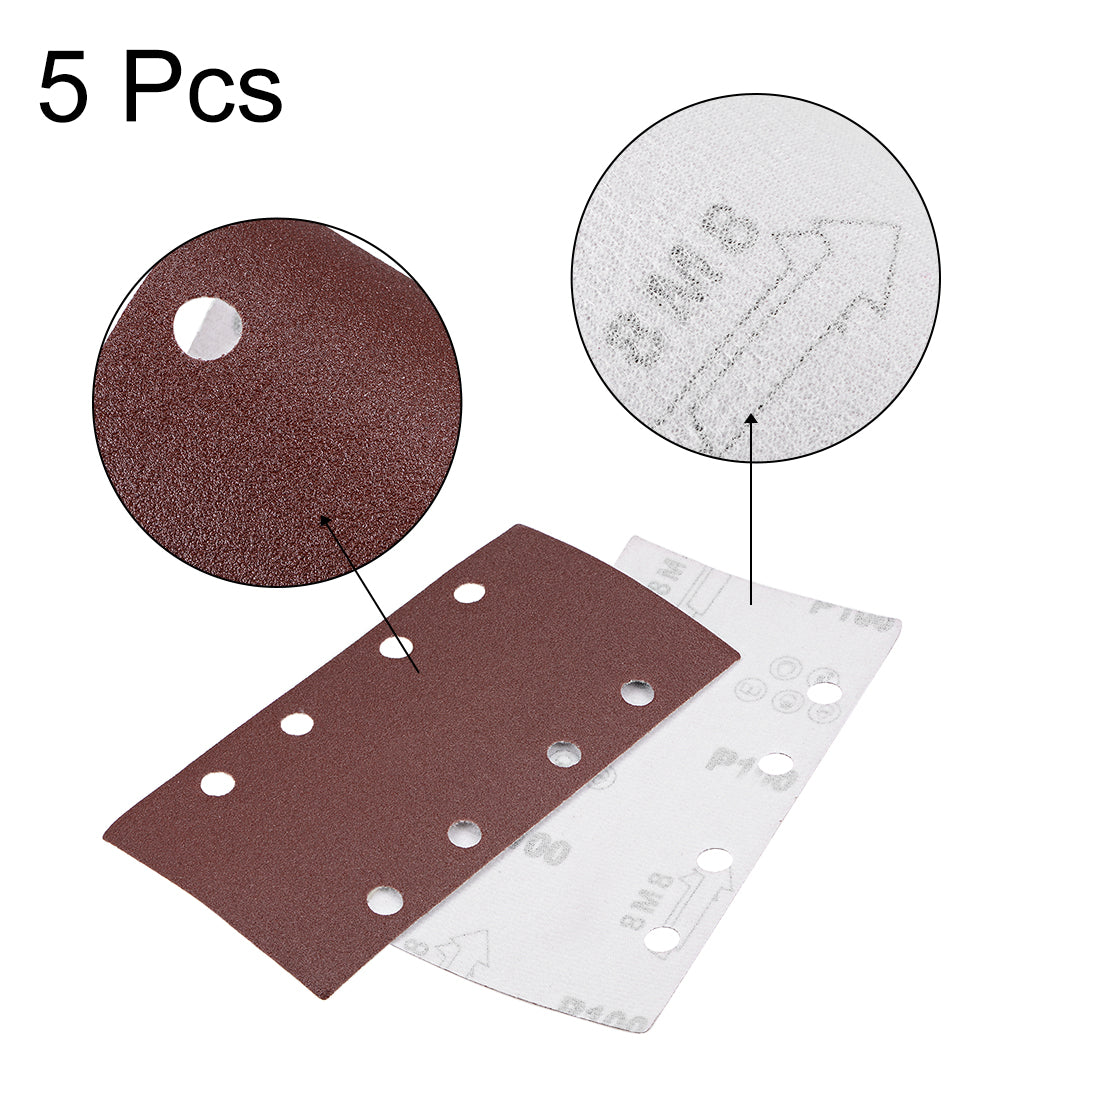 Uxcell Uxcell 240-Grits 8-Holes Hook and Loop Sanding Sheet, 7.3 x 3.6-inch Wet Dry Aluminum Oxide Sandpaper for Sander 5pcs